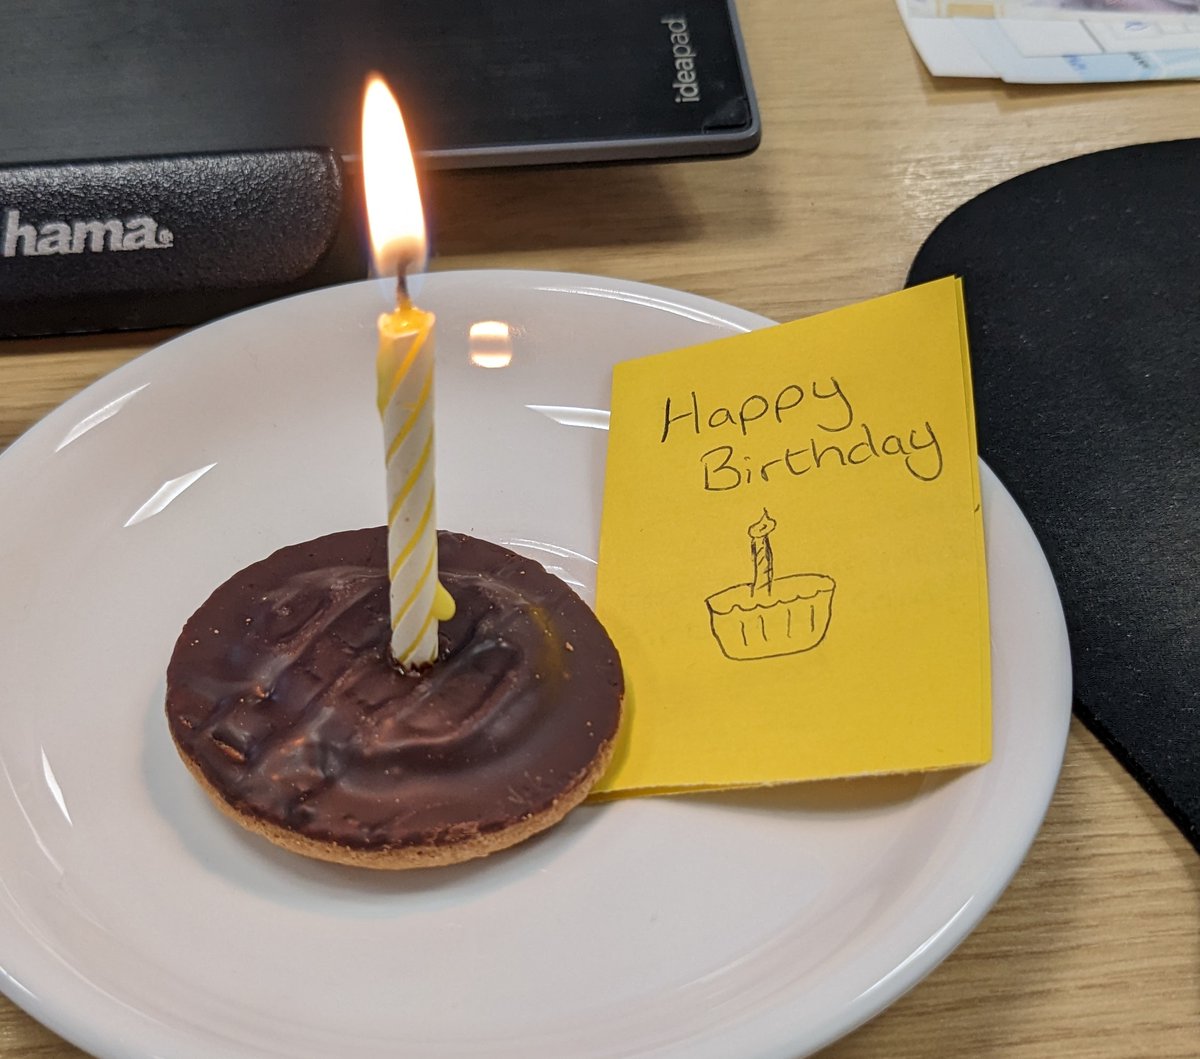 This is what happens when you find out its a long-term volunteer's birthday (they told you 5 minutes ago!) so you improvise... Happy Monday / birthday - whatever it is for you today 🤩